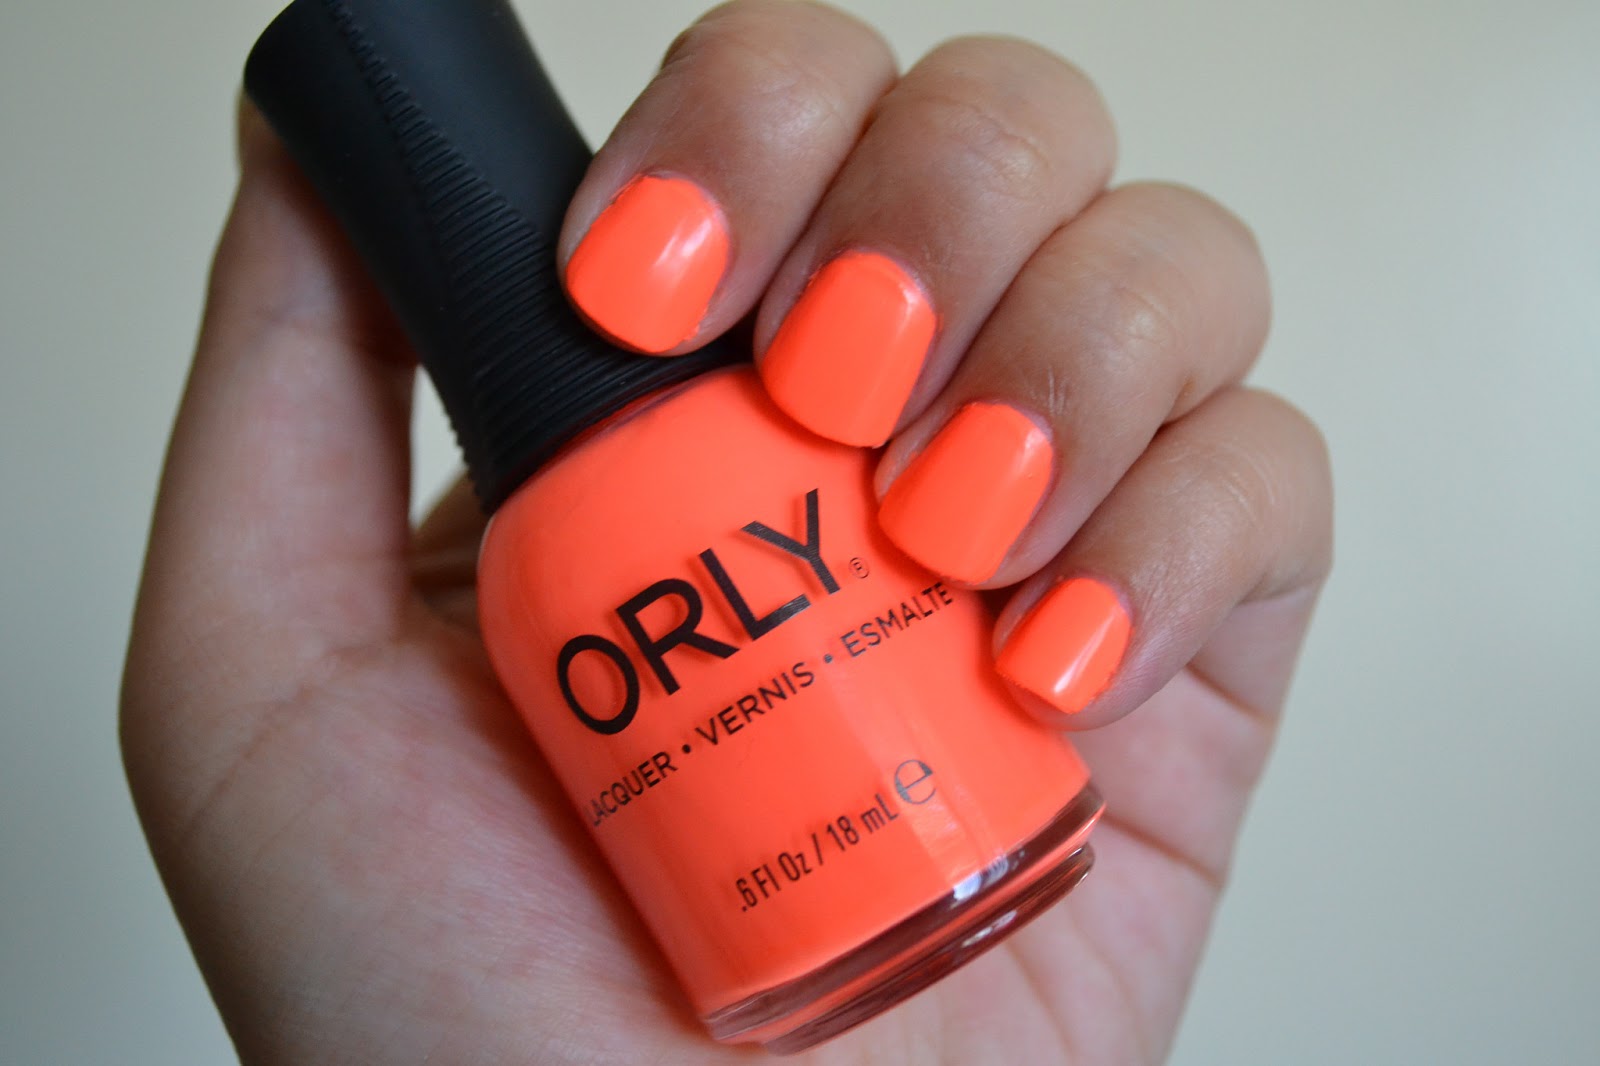 7. Orly GelFX in "Glowstick" - wide 3